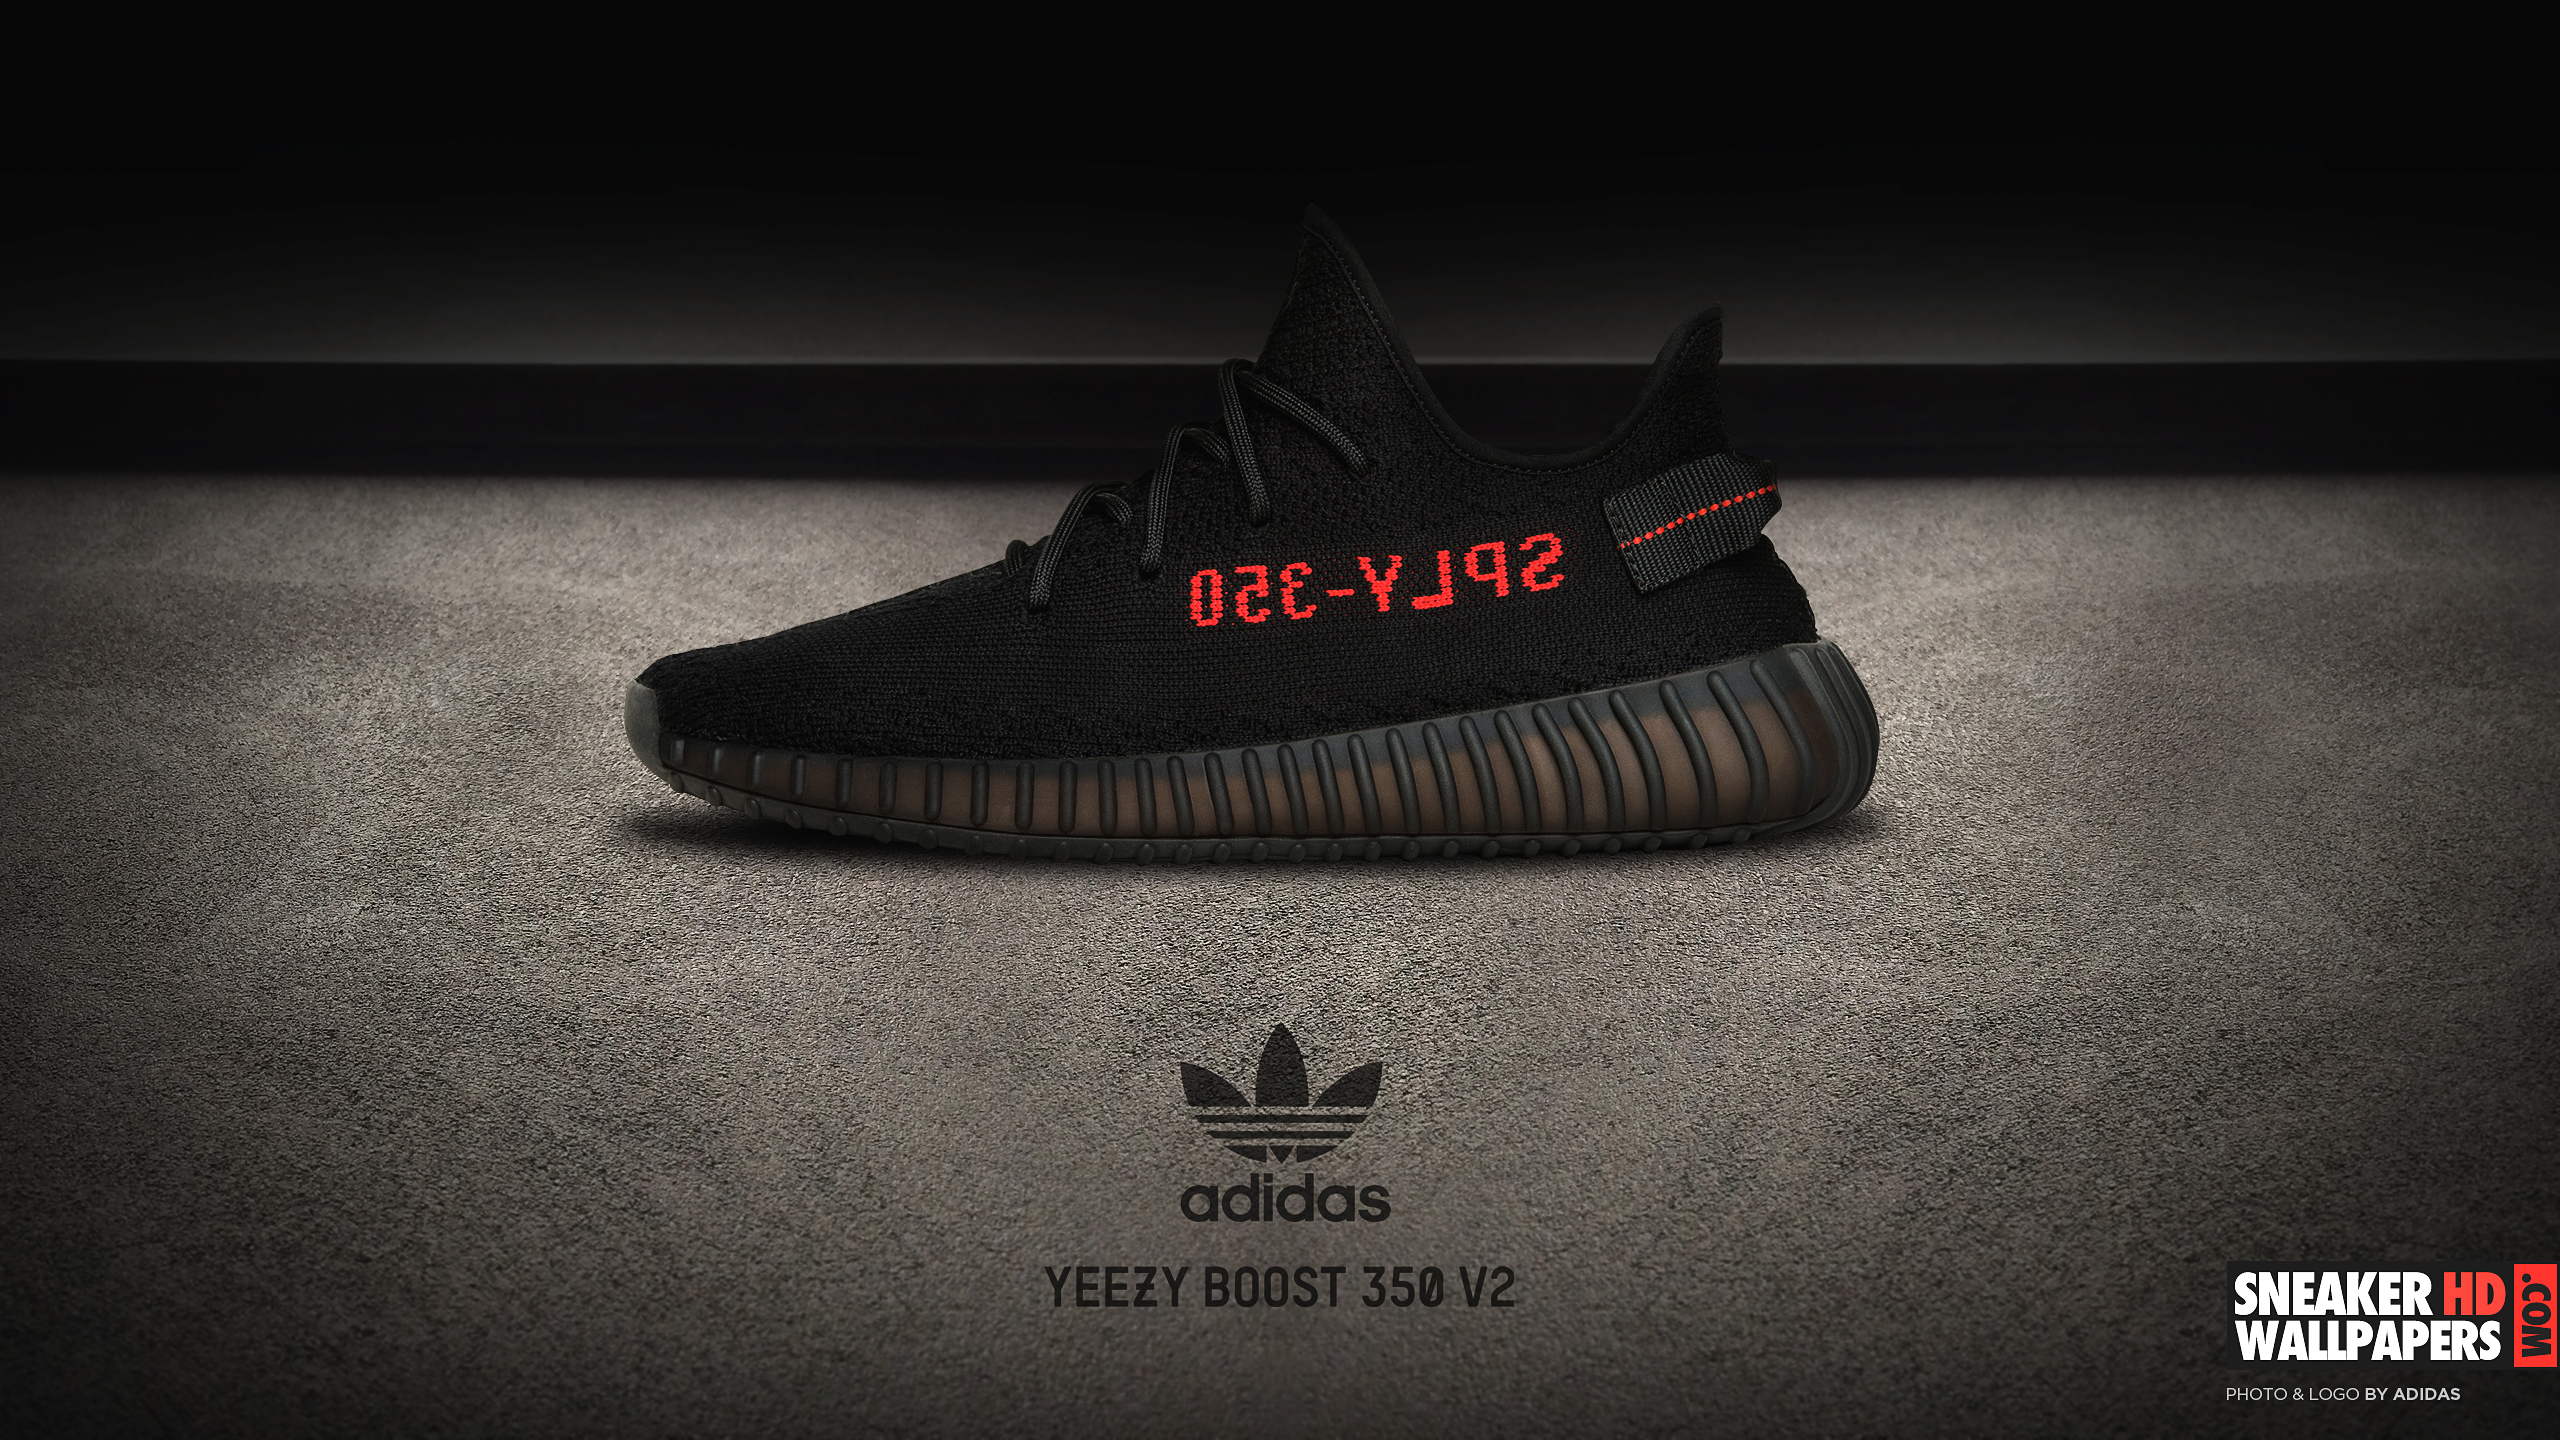 SneakerHDWallpapers.com – Your favorite sneakers in 4K, Retina, Mobile and HD wallpaper resolutions! » Blog Archive Adidas Yeezy Boost V2 Black/Red wallpaper - SneakerHDWallpapers.com - Your favorite sneakers in 4K,